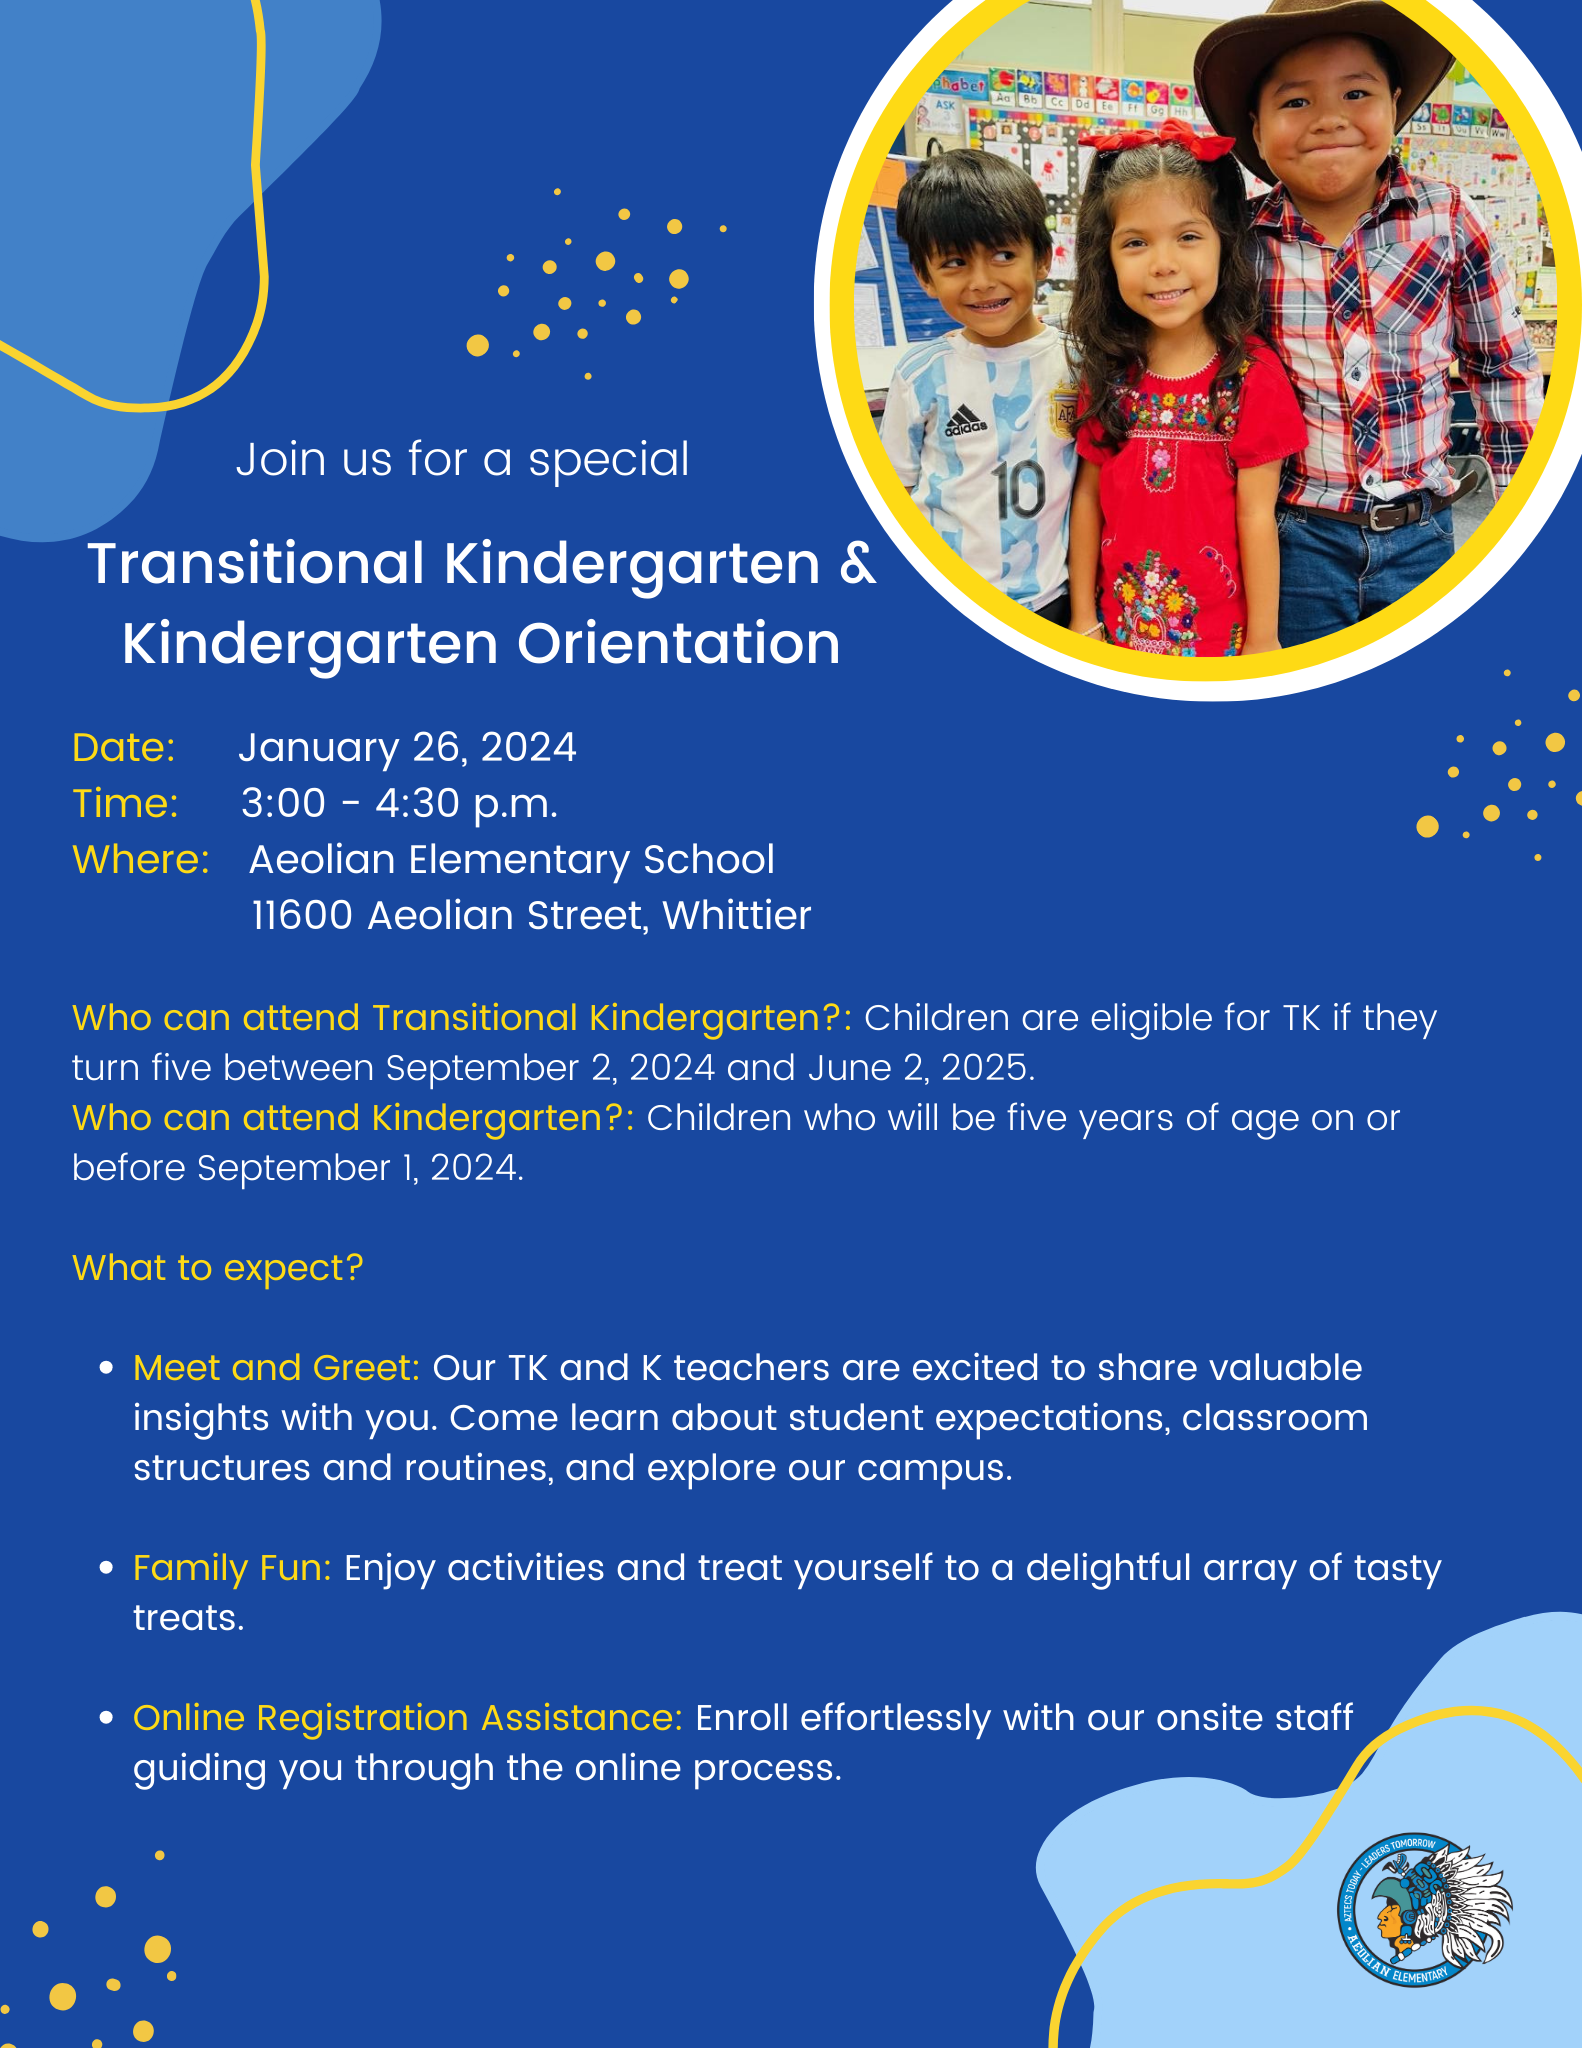 Flyer for a Transitional Kindergarten and Kindergarten Orientation at Aeolian Elementary School. It features an image of three smiling young students and provides event details for January 26, 2024, including the time and location. Highlights include a meet and greet, family fun activities, and online registration assistance, targeting children eligible for TK and Kindergarten with specific age requirements.